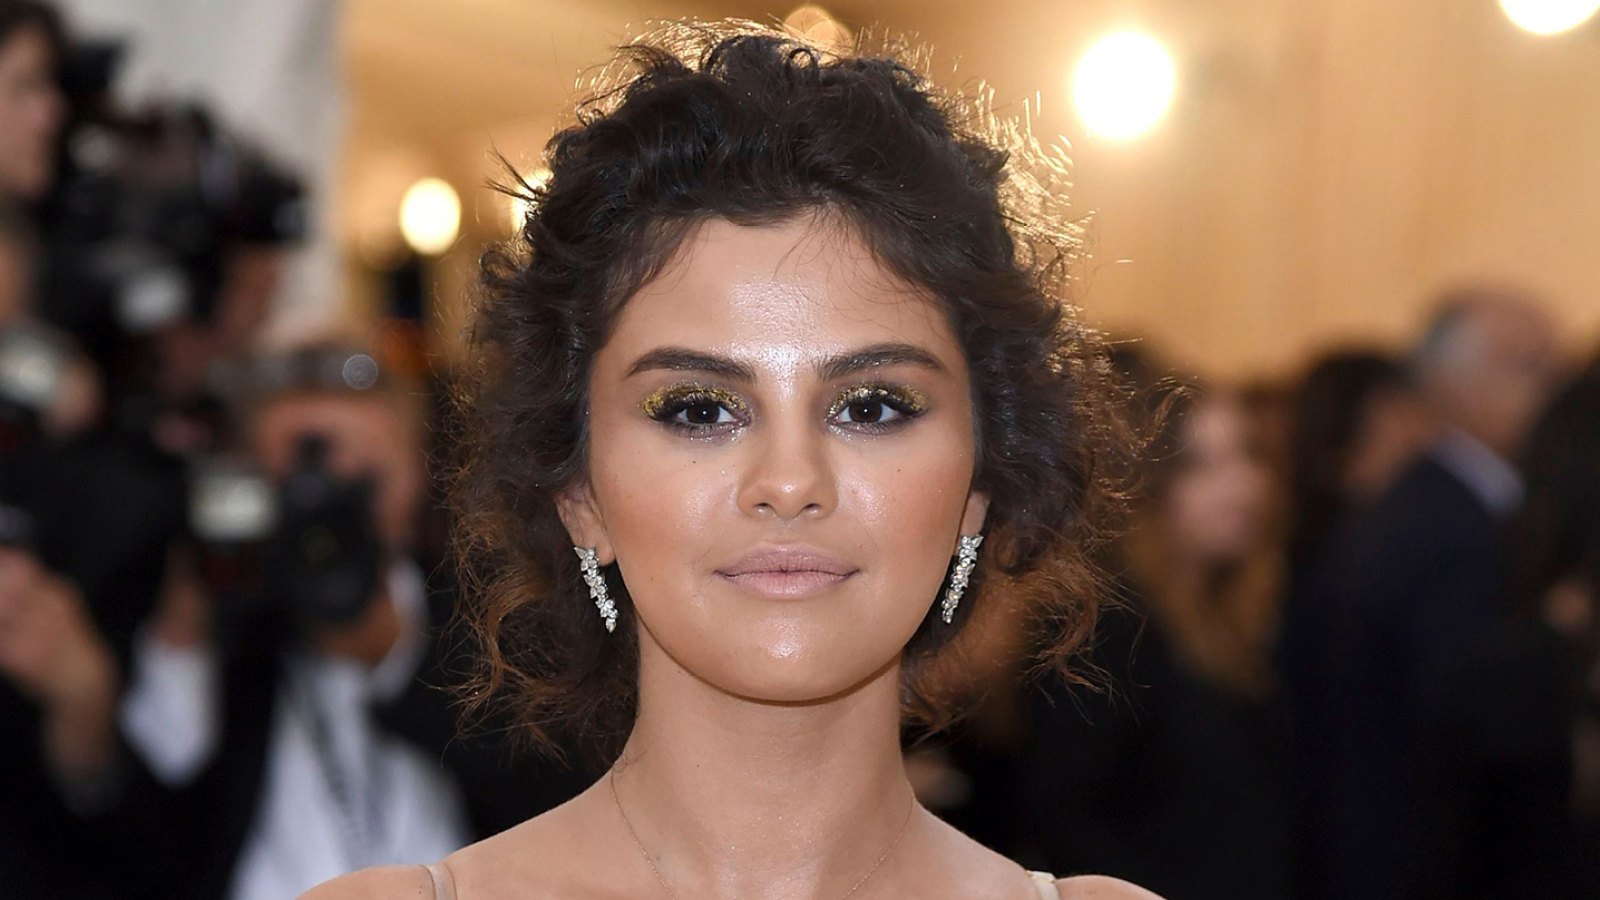 Selena Gomez Wanted to Leave the 2018 Met Gala After Realizing She Was Completely Orange